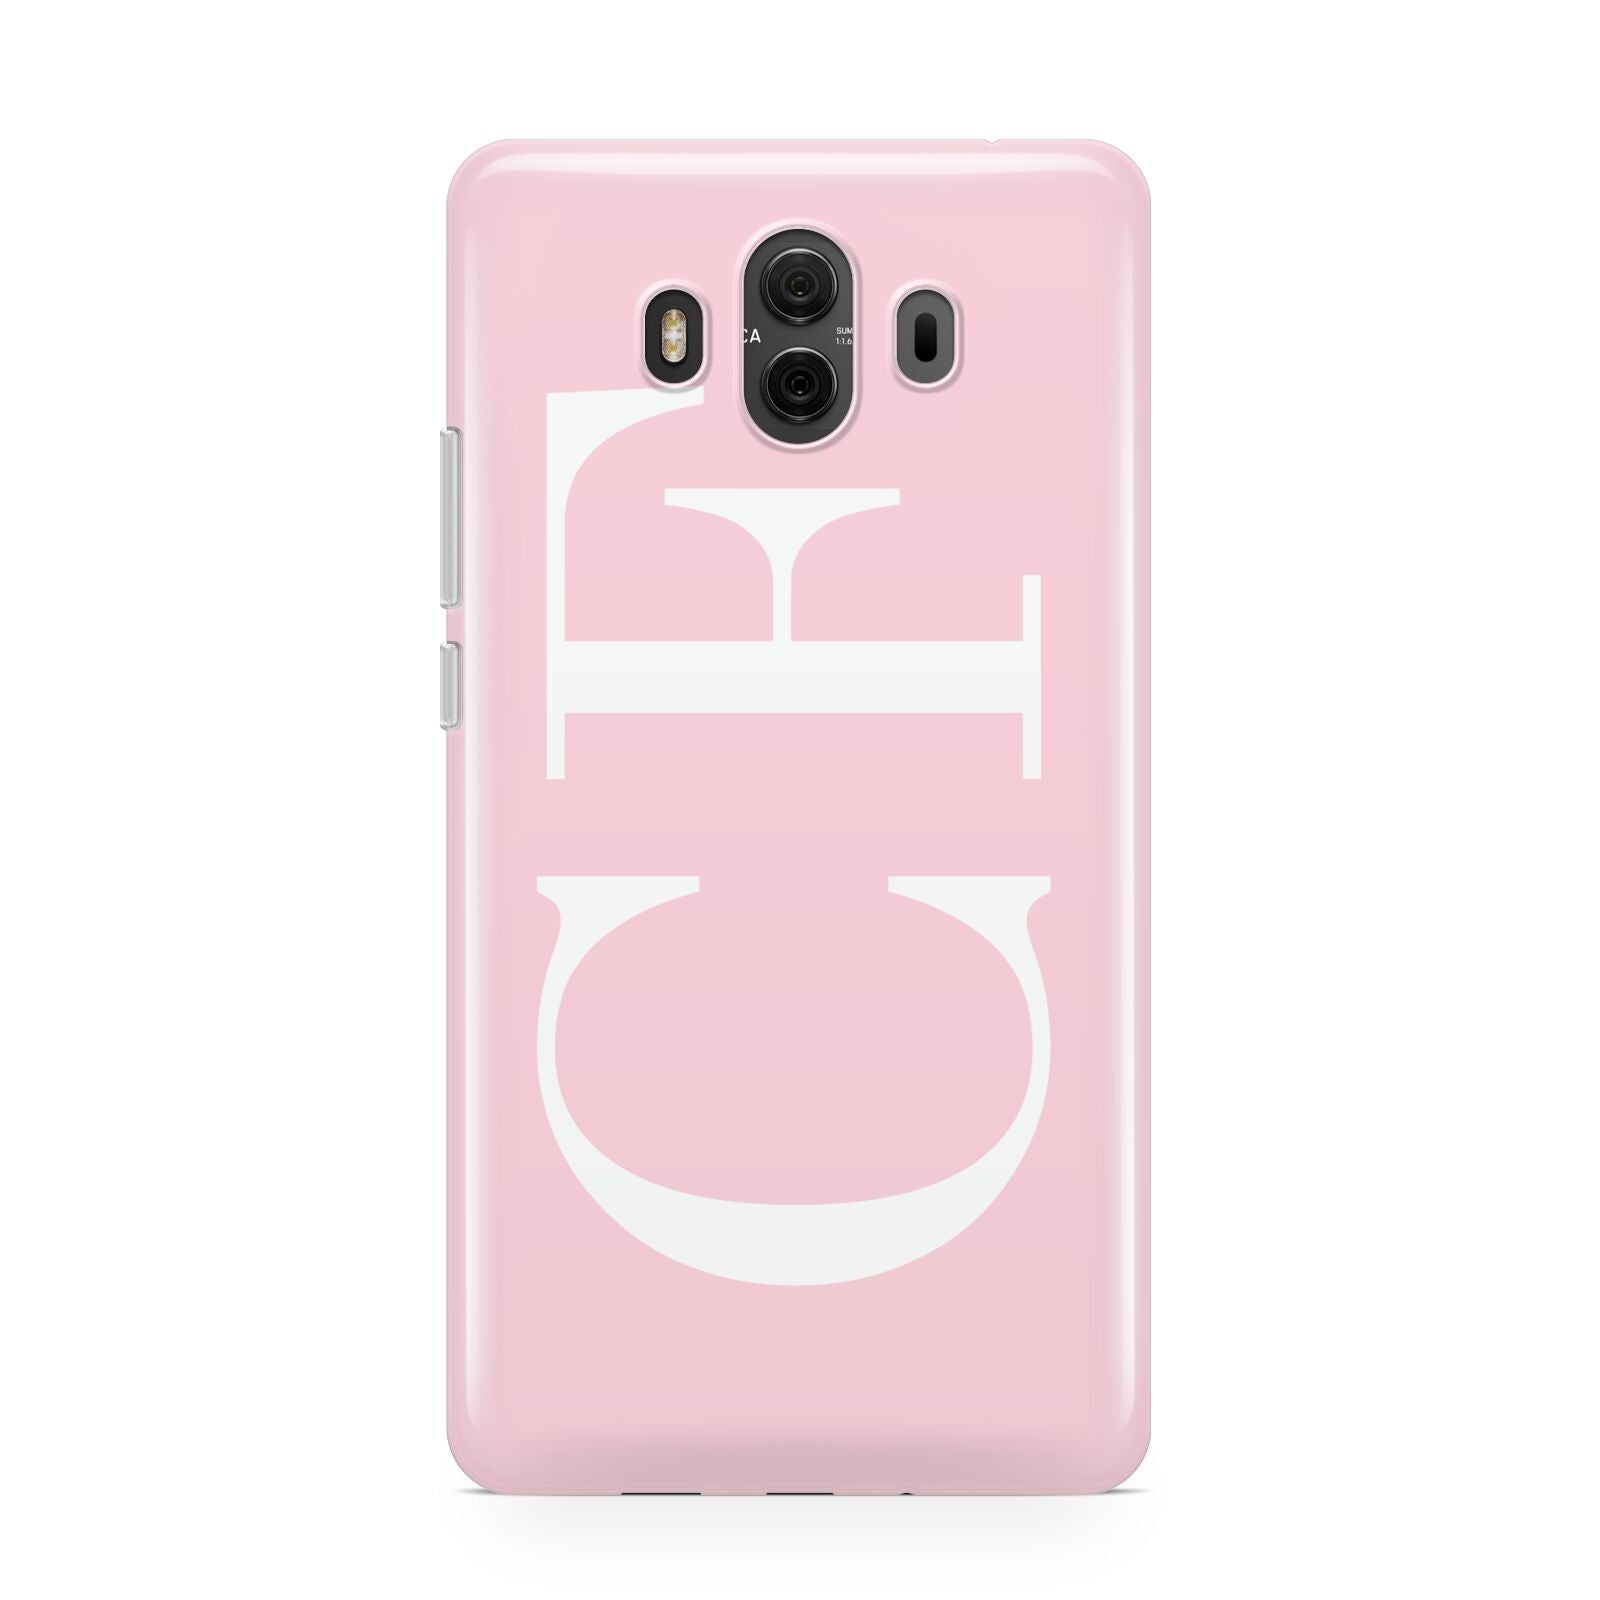 Personalised Pink White Side Initials Huawei Mate 10 Protective Phone Case